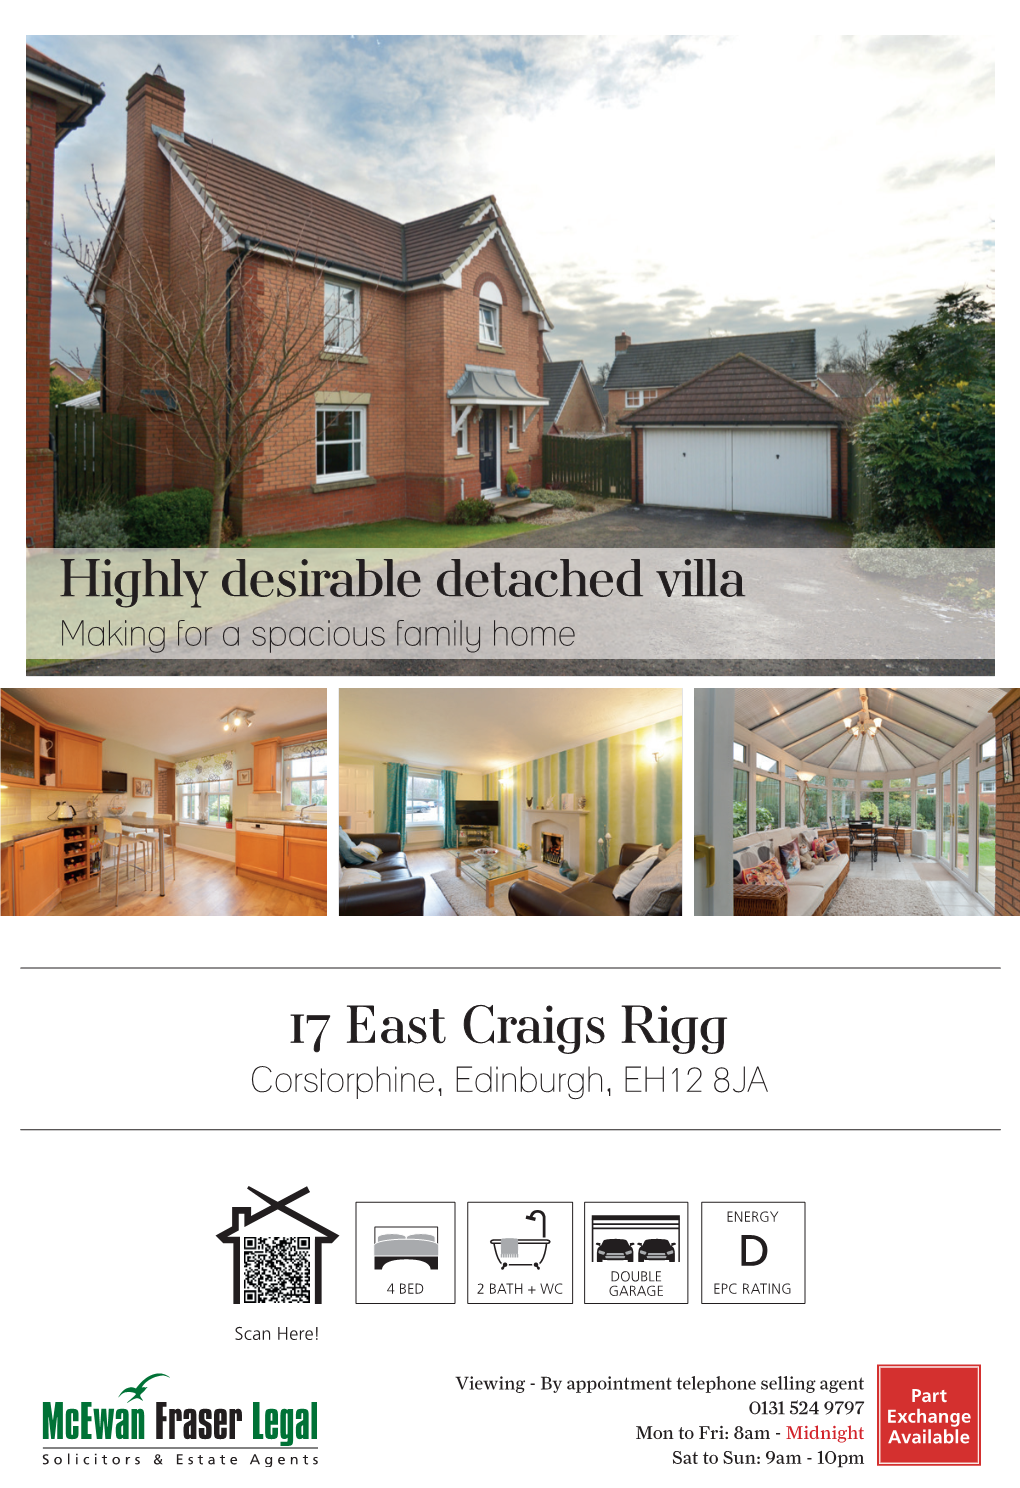 17 East Craigs Rigg Highly Desirable Detached Villa